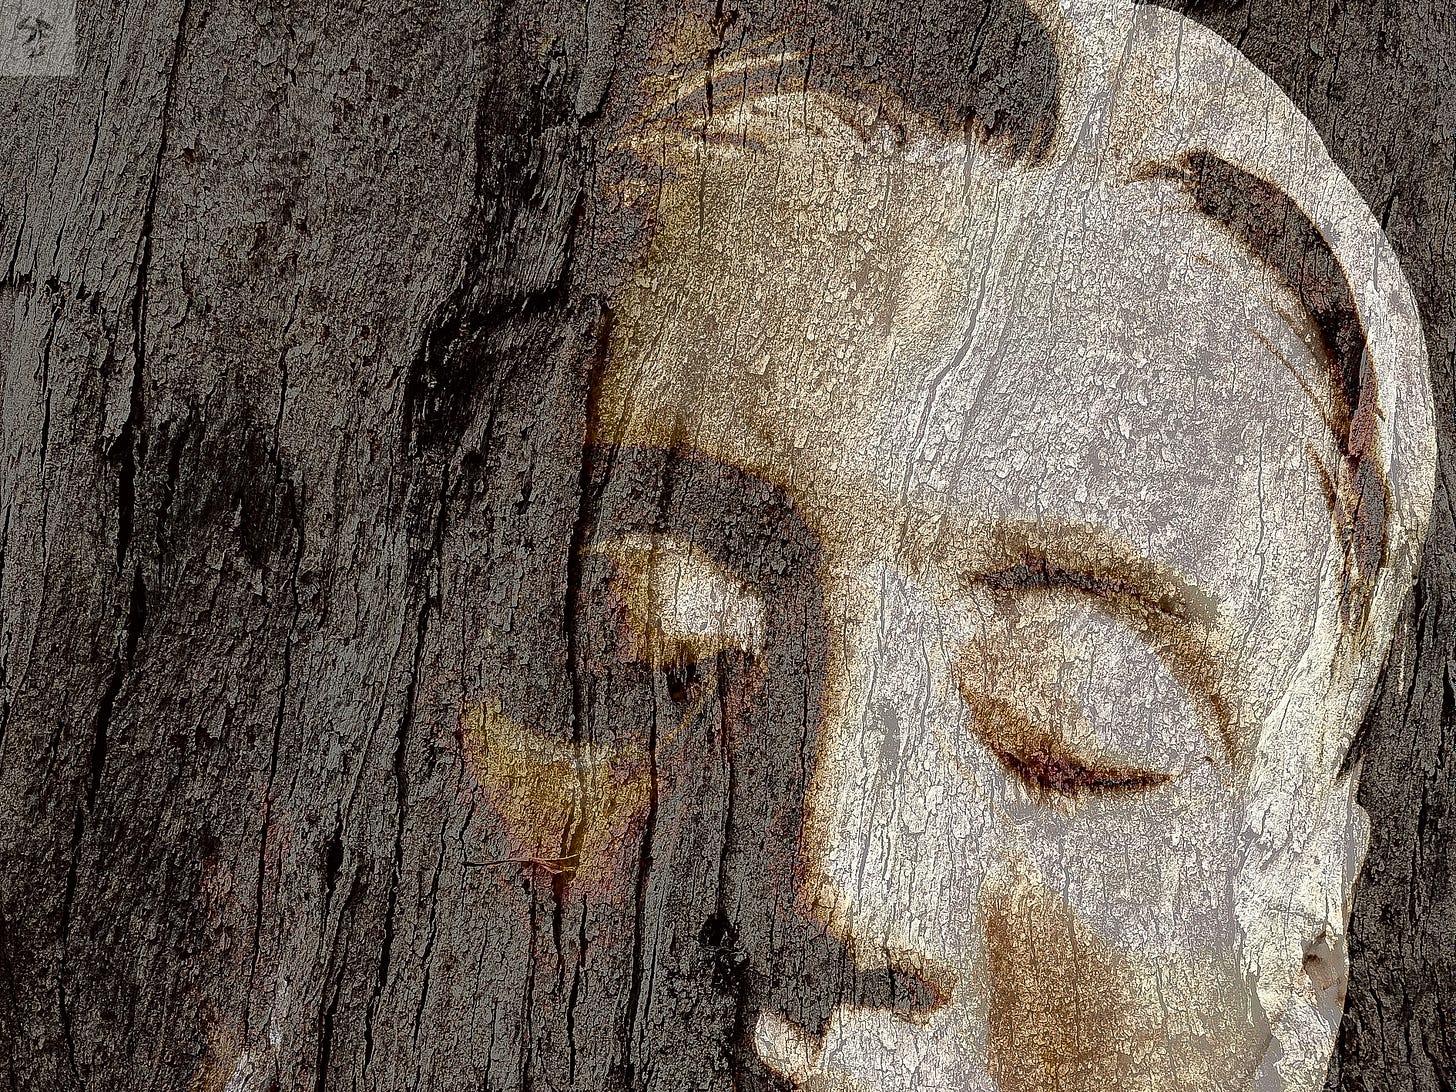 A tree trunk with a carved wooden female face superimposed